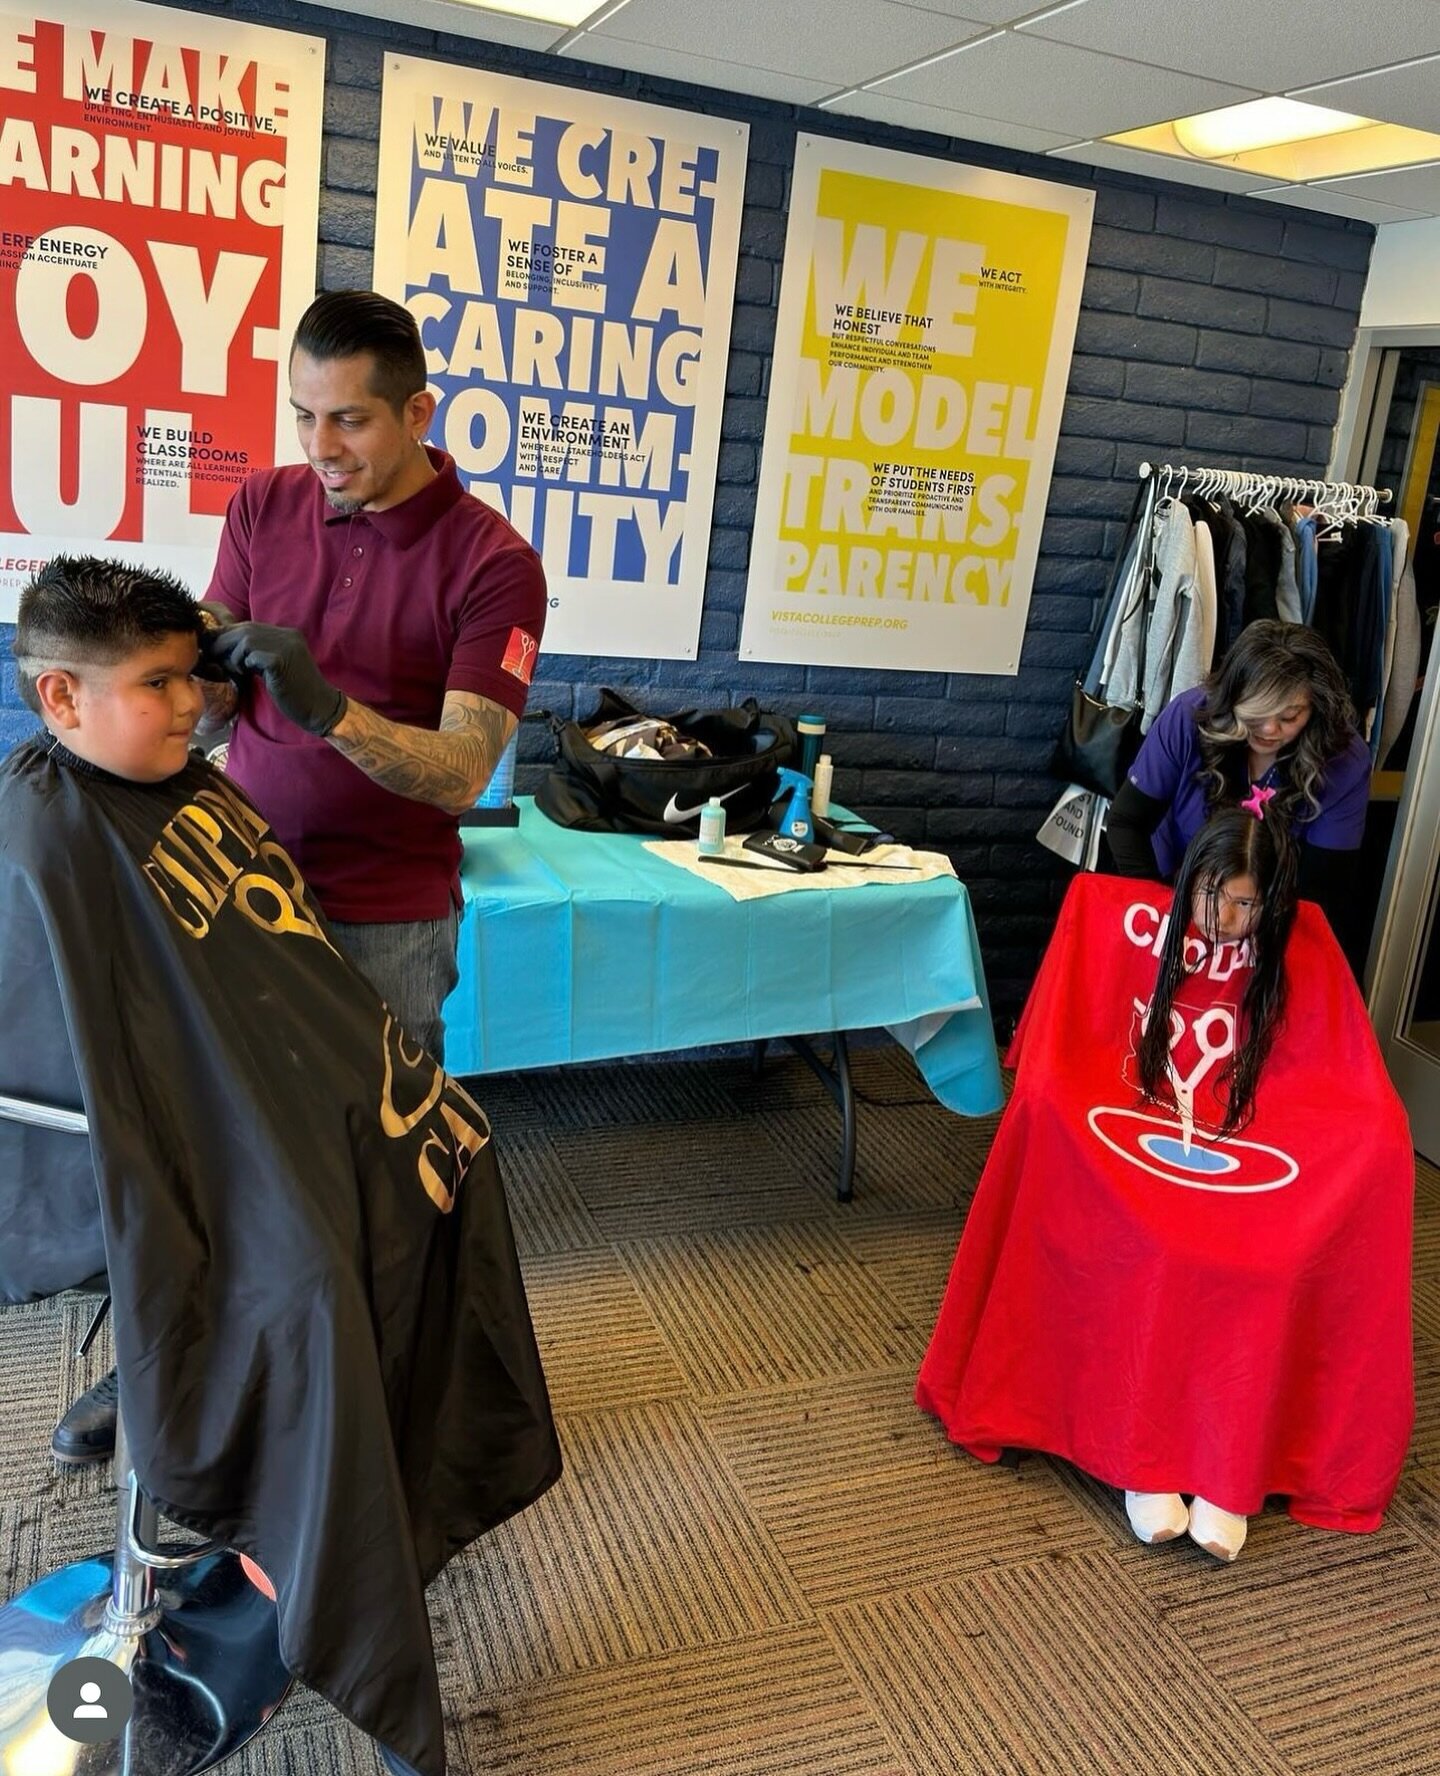 David @azclipdartcares and Rosa @carreto9933 are volunteering their time to offer haircuts to children during an event arranged by Vista College Prep @vistacollegeprep. Vista College Prep is a network of five tuition-free, public charter schools in P